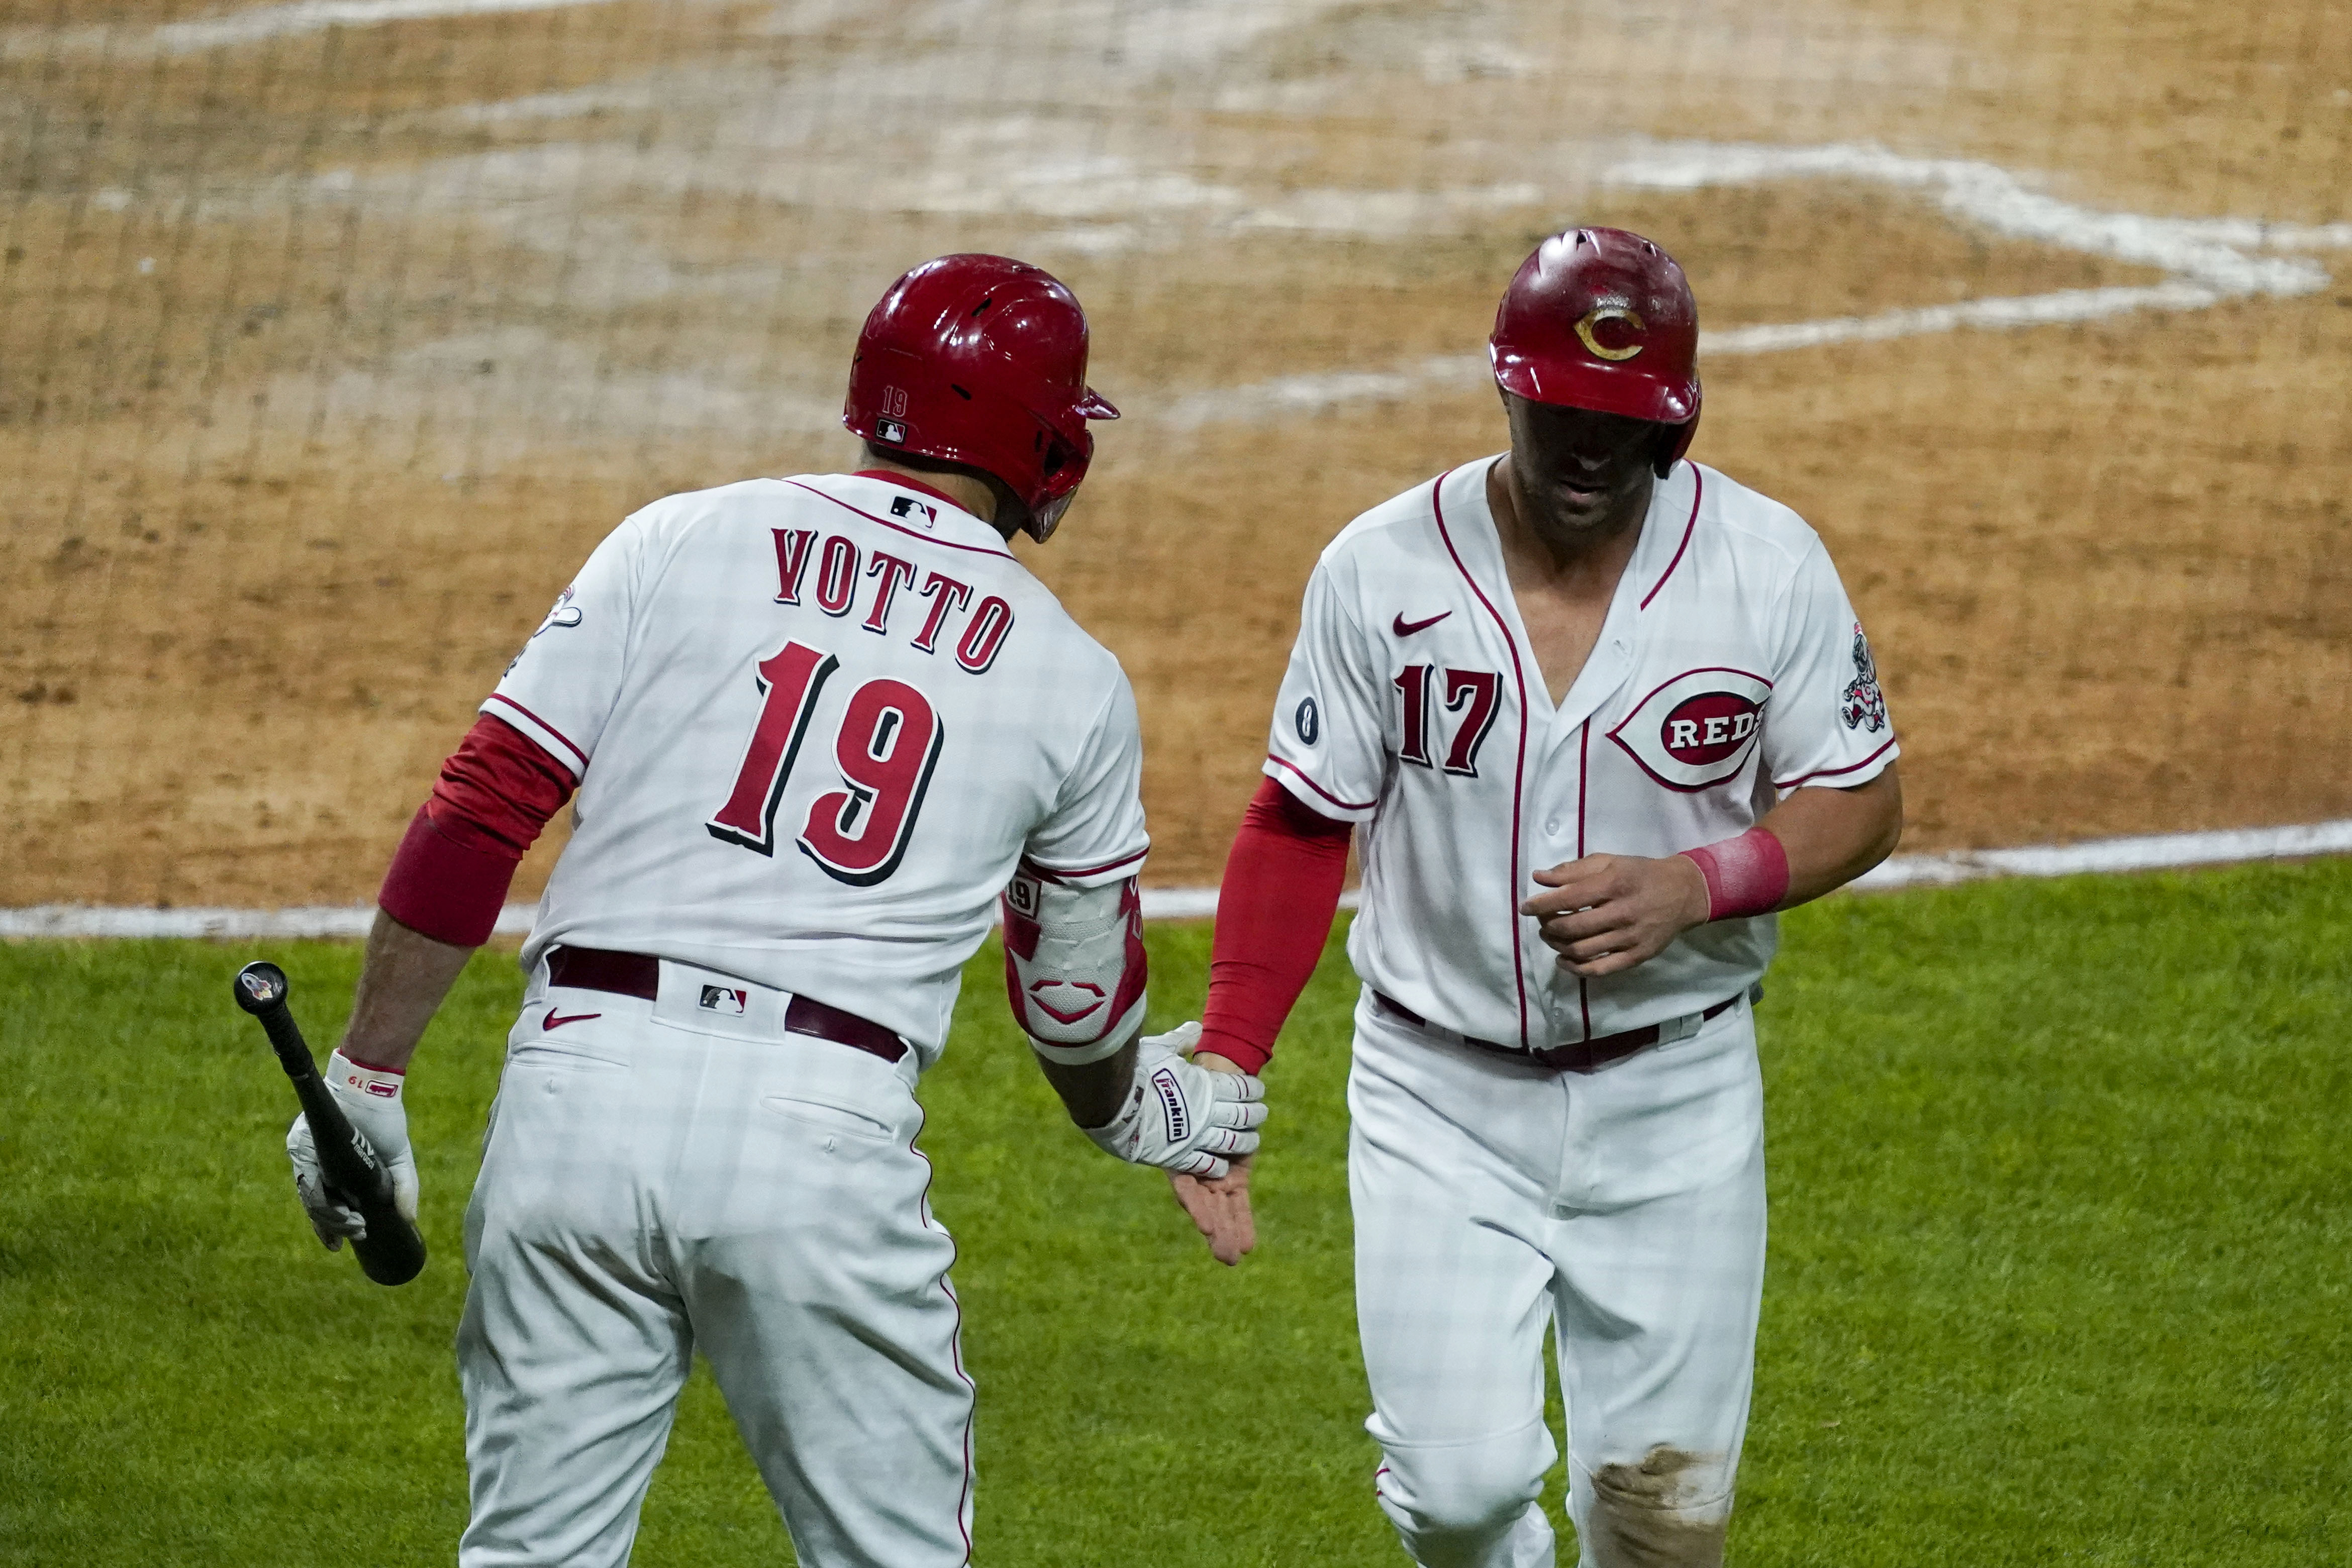 Votto hits 300th homer, adds 2 doubles as Reds beat Cubs 8-6